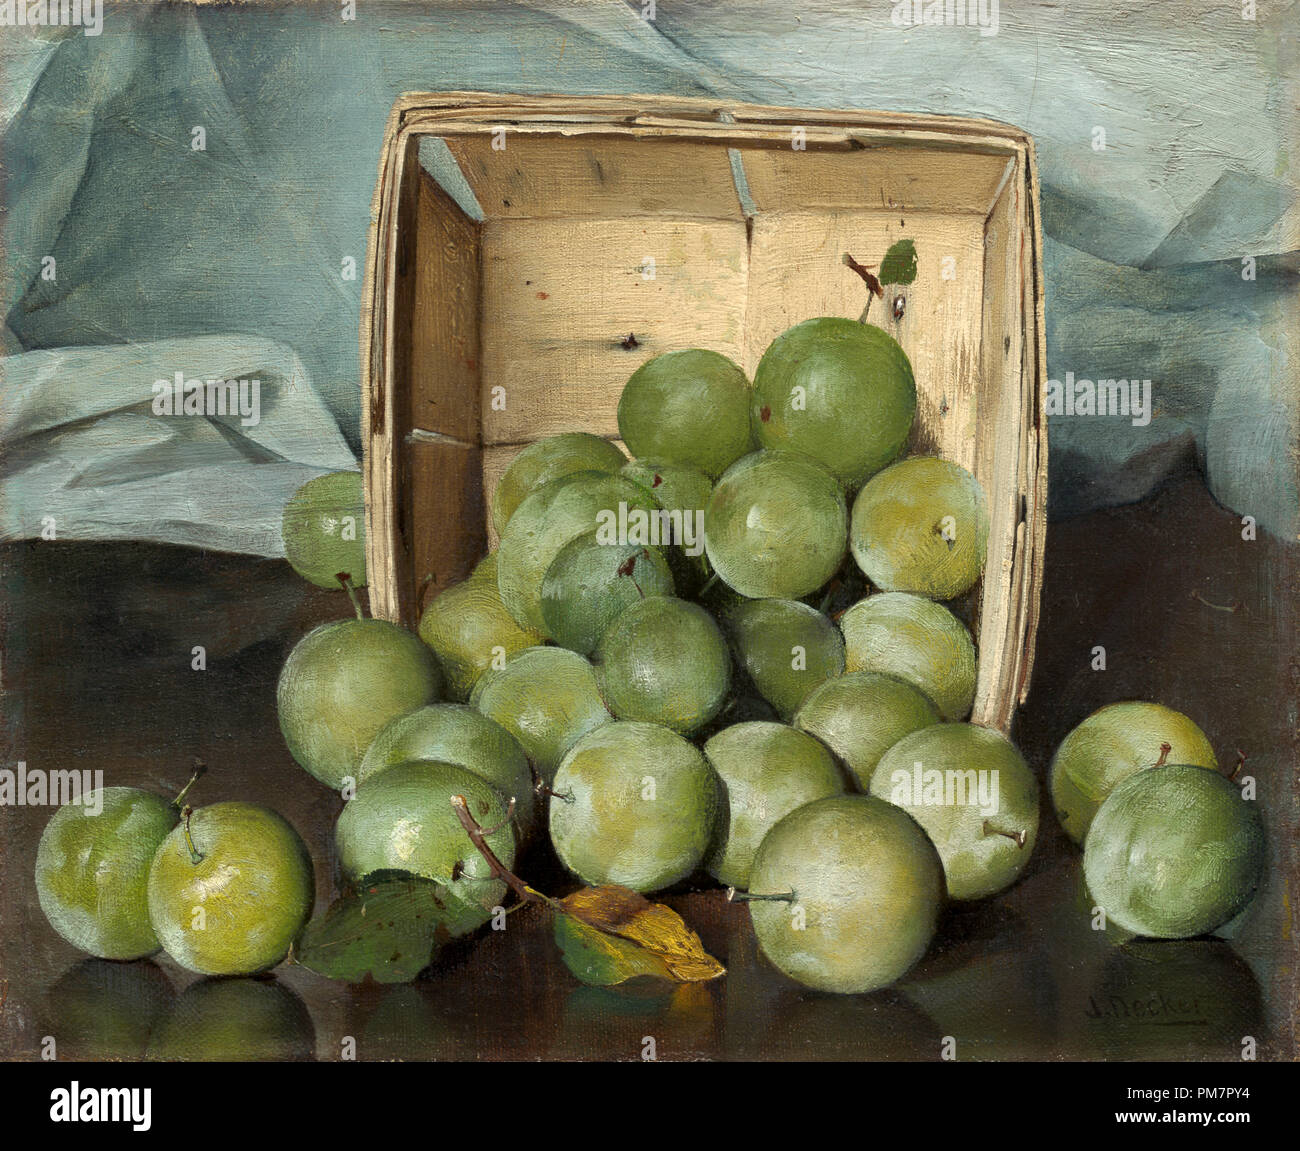 Green Plums. Dated: c. 1885. Dimensions: overall: 22.9 x 27.8 cm (9 x 10 15/16 in.)  framed: 55.6 x 63.5 x 7.6 cm (21 7/8 x 25 x 3 in.). Medium: oil on canvas. Museum: National Gallery of Art, Washington DC. Author: Joseph Decker. Stock Photo